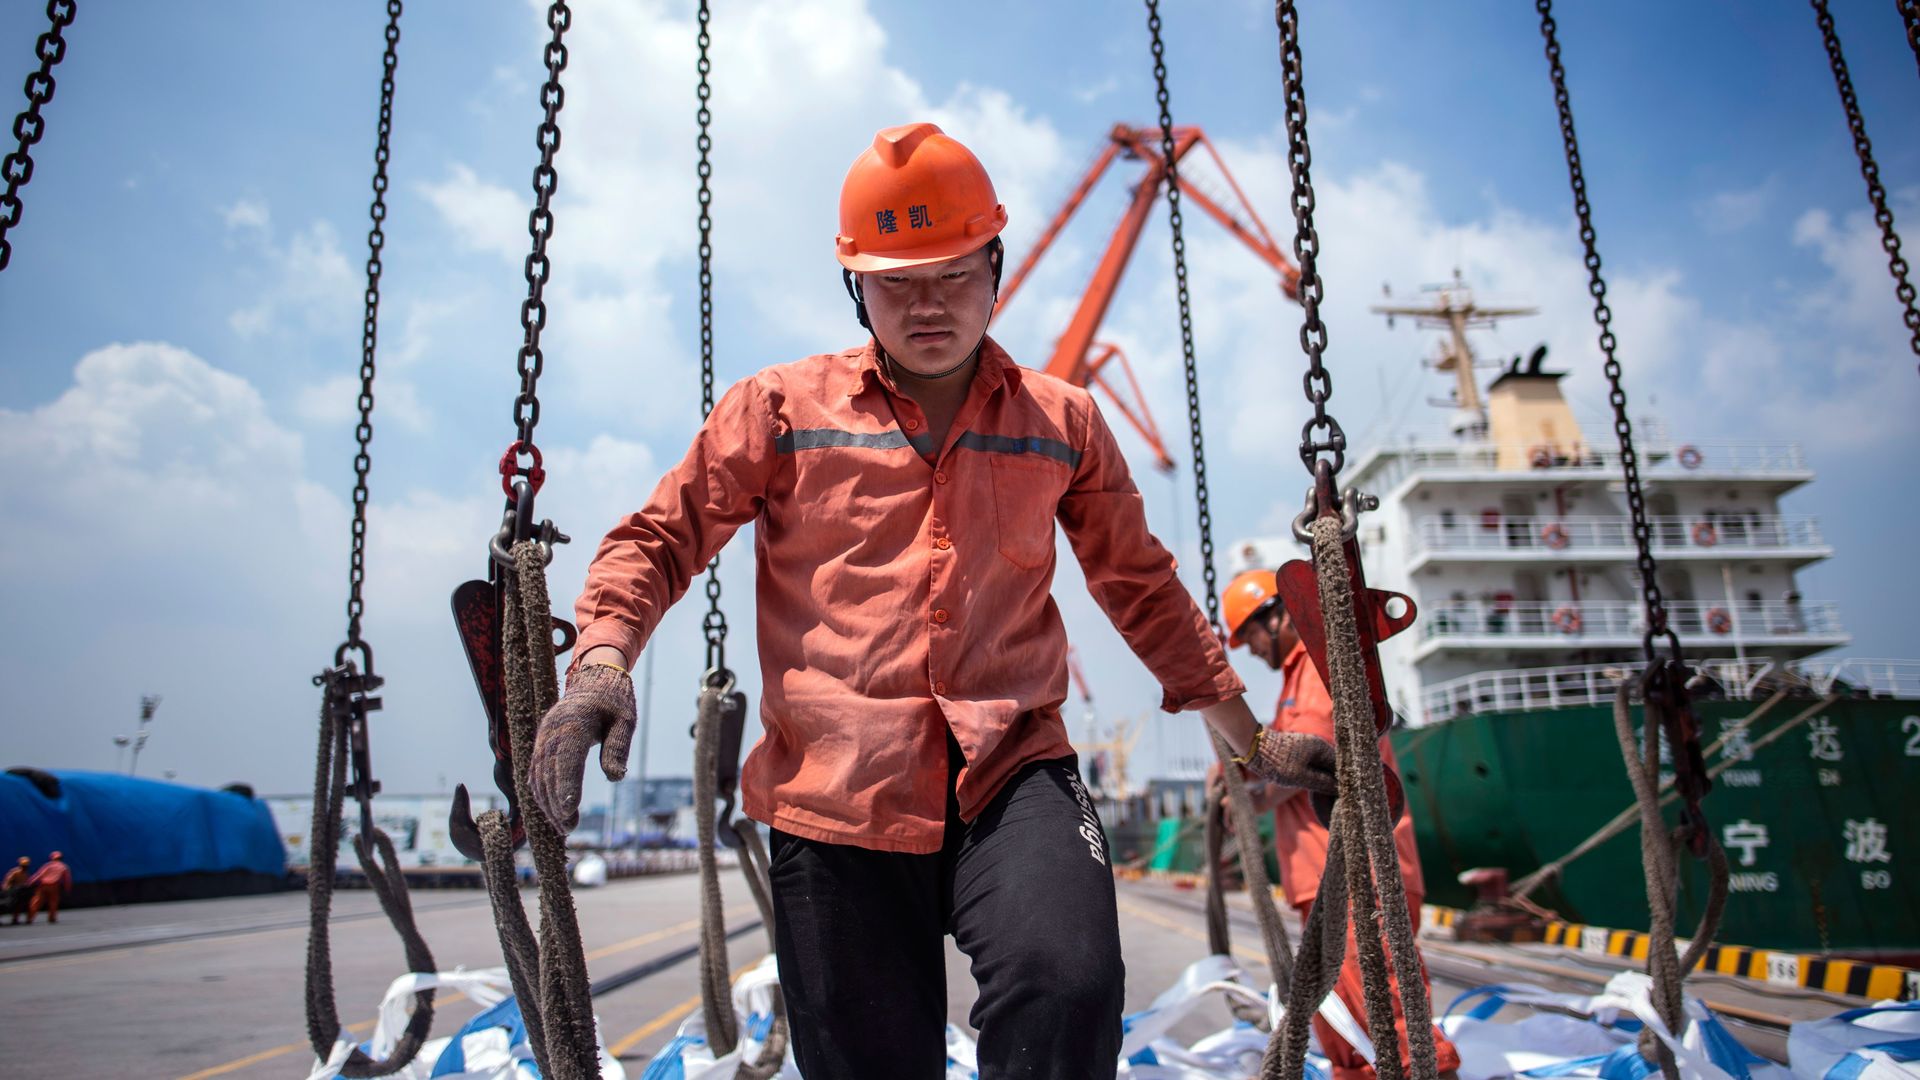 Chinese worker unloading bags of chemicals at a port